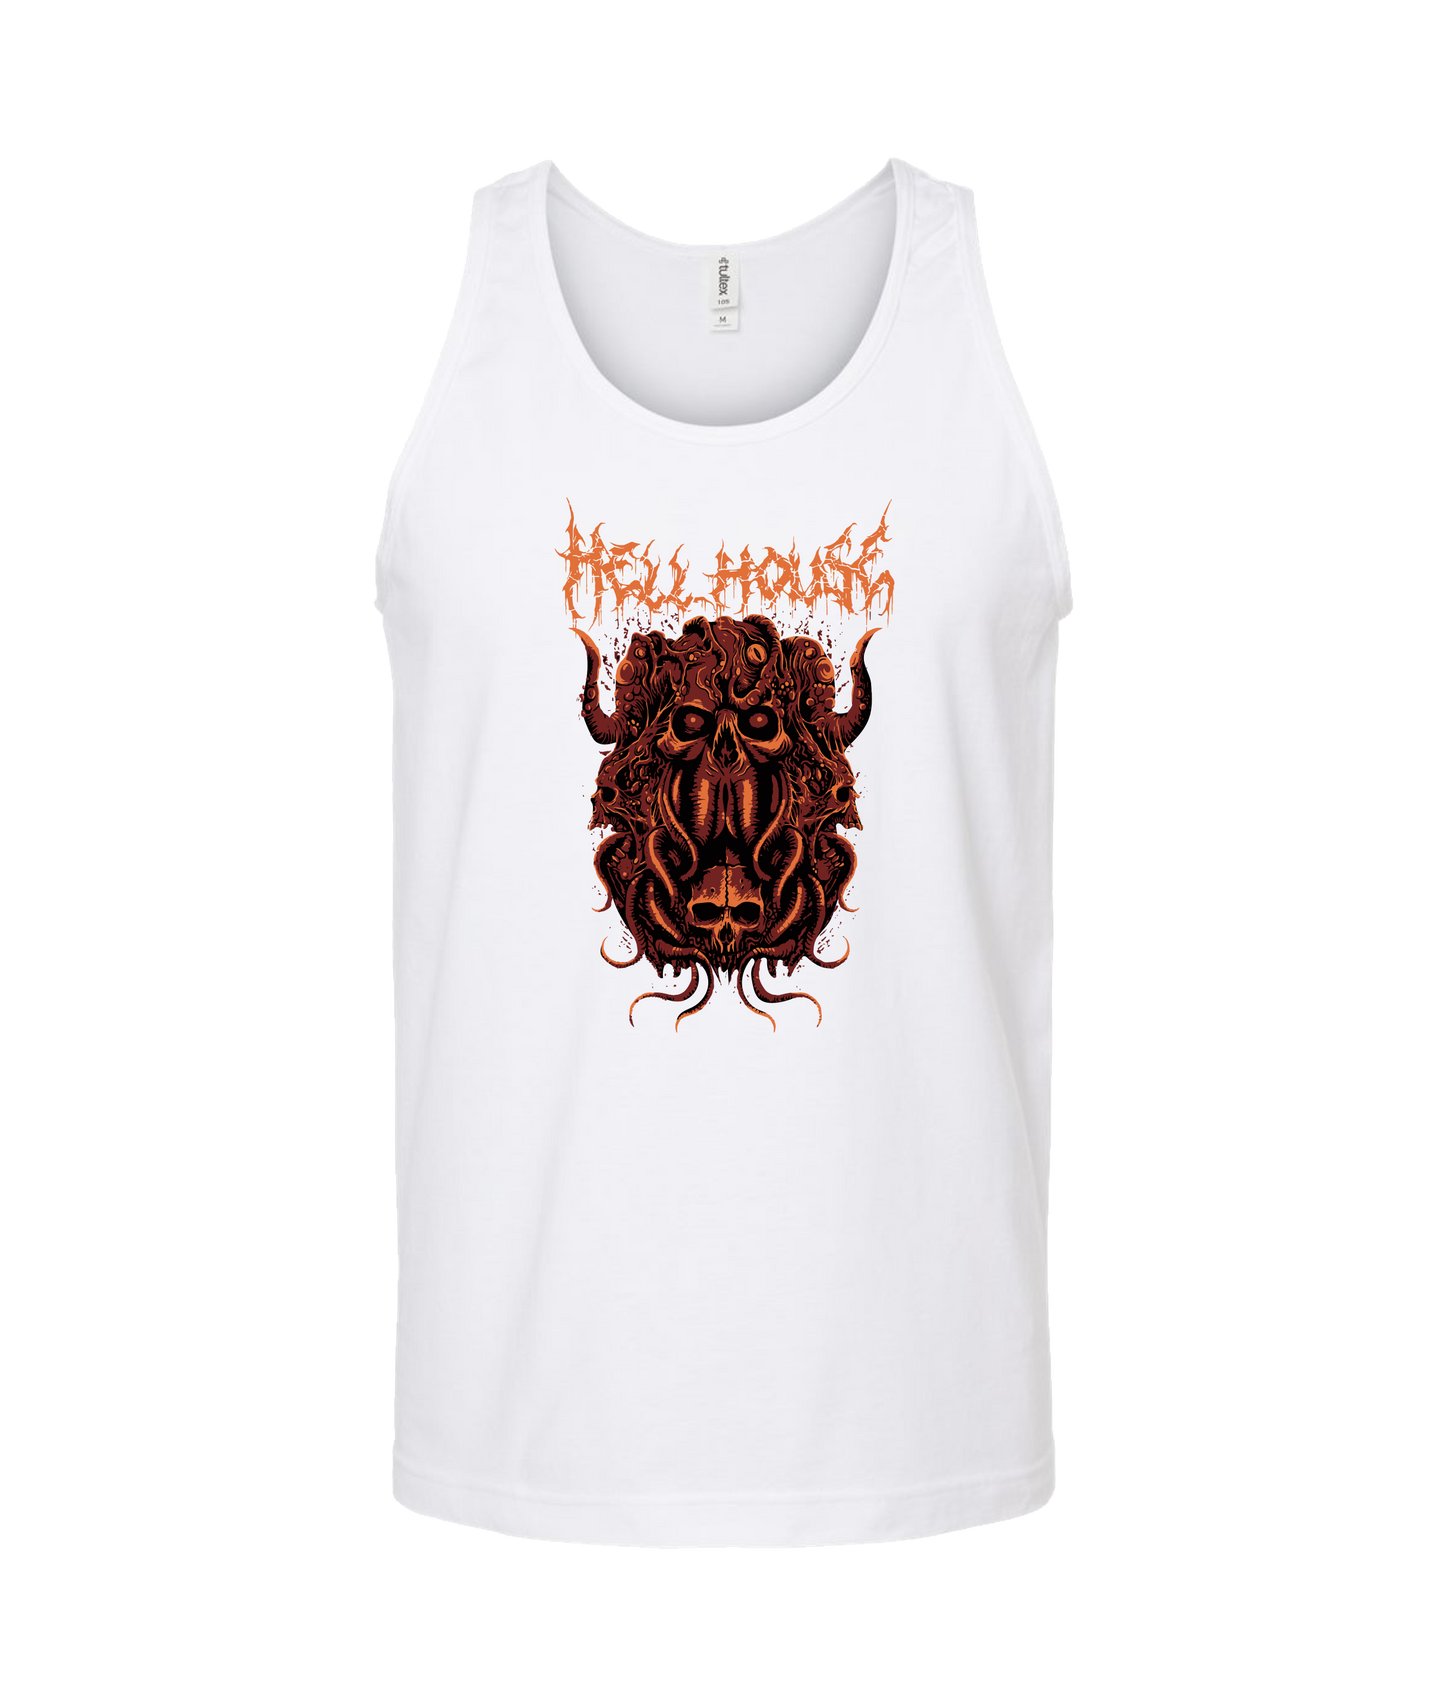 Hellhouse crypt - OCTOPUSSSKVLL - White Tank Top